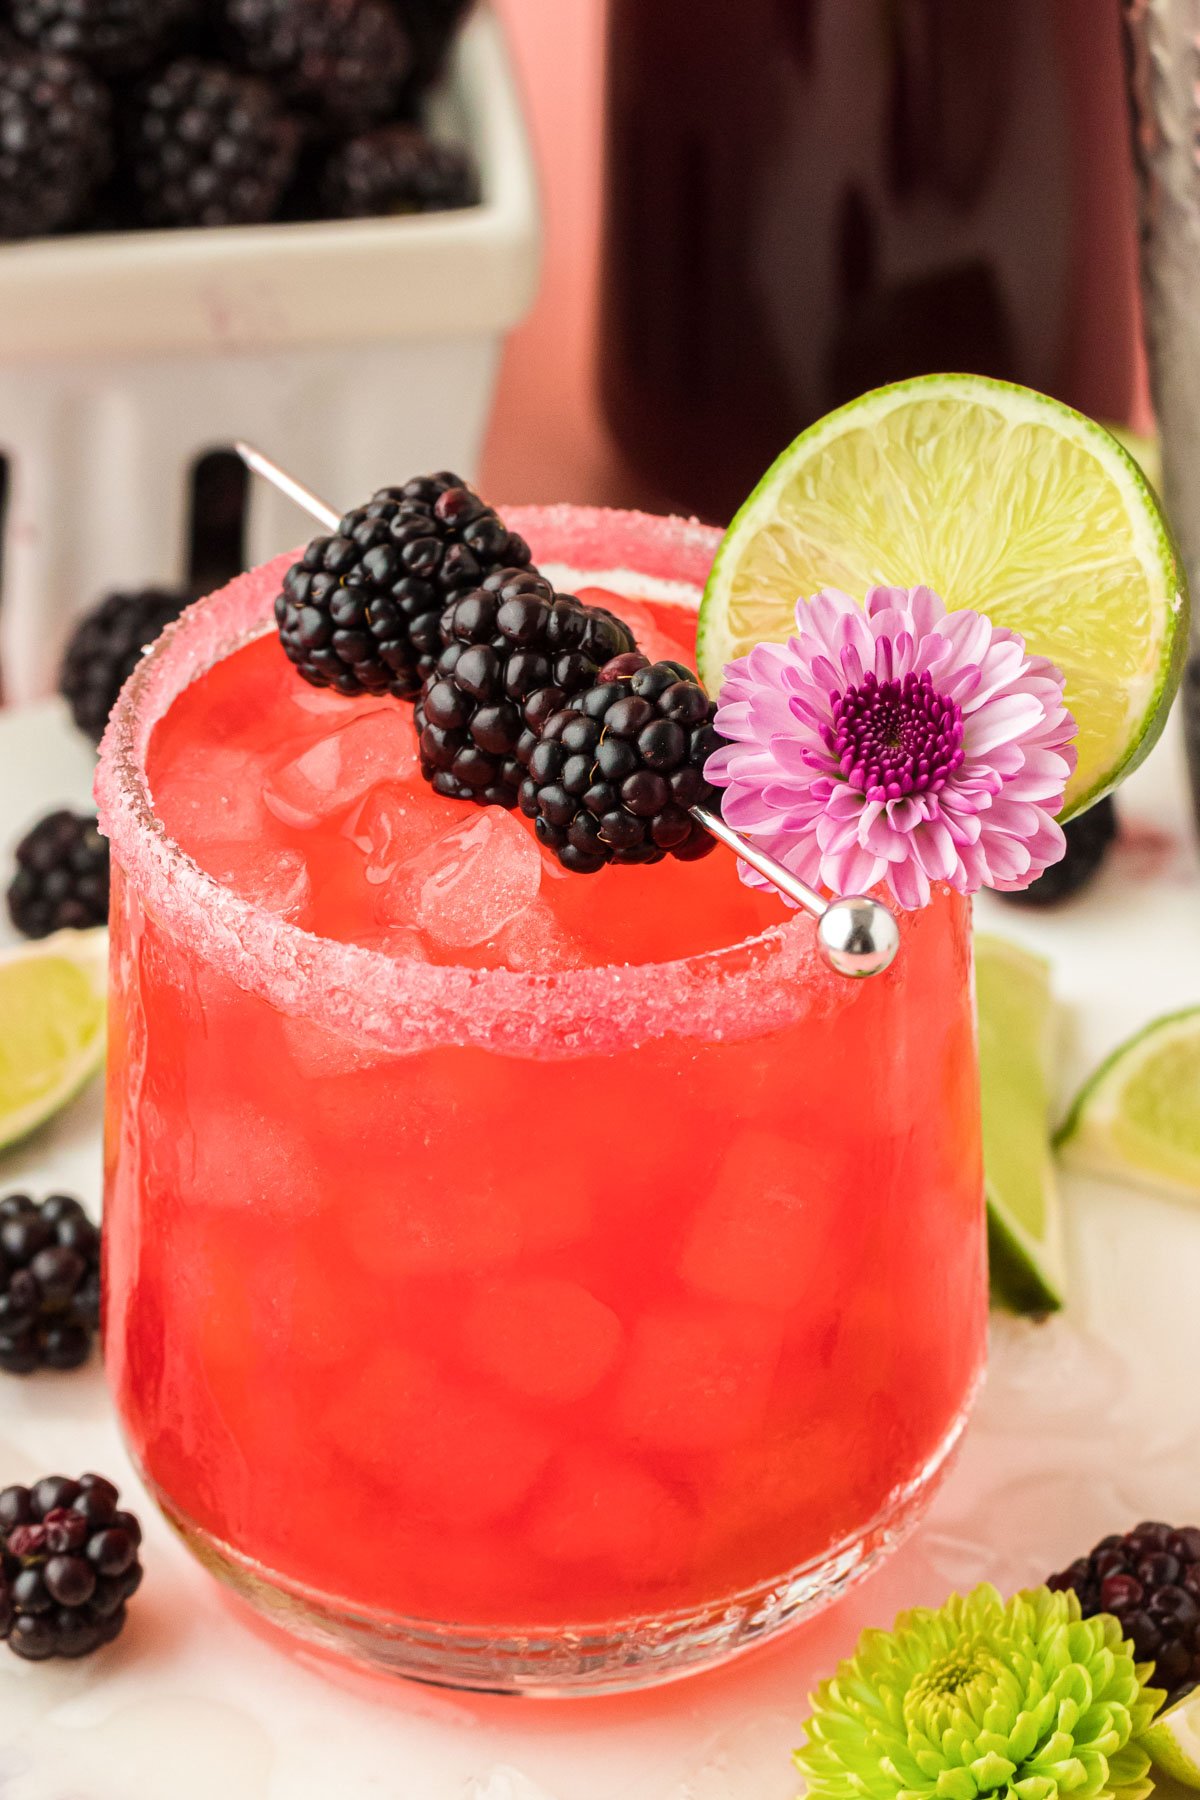 Close up photo of a blackberry margarita on a table garnished with blackberries, lime, and a flower.